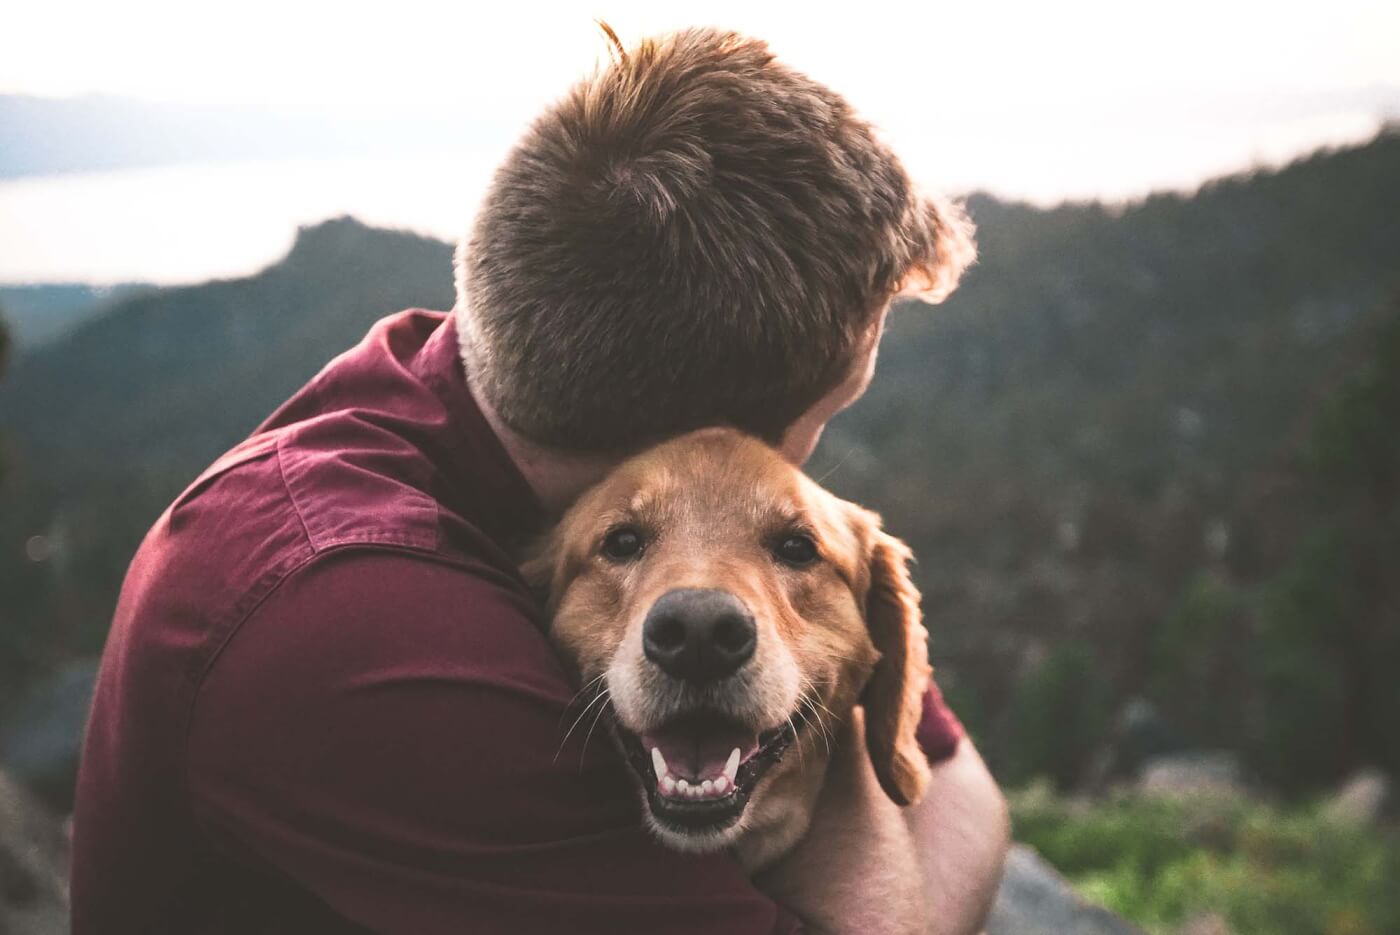 A person with short hair hugs a smiling dog